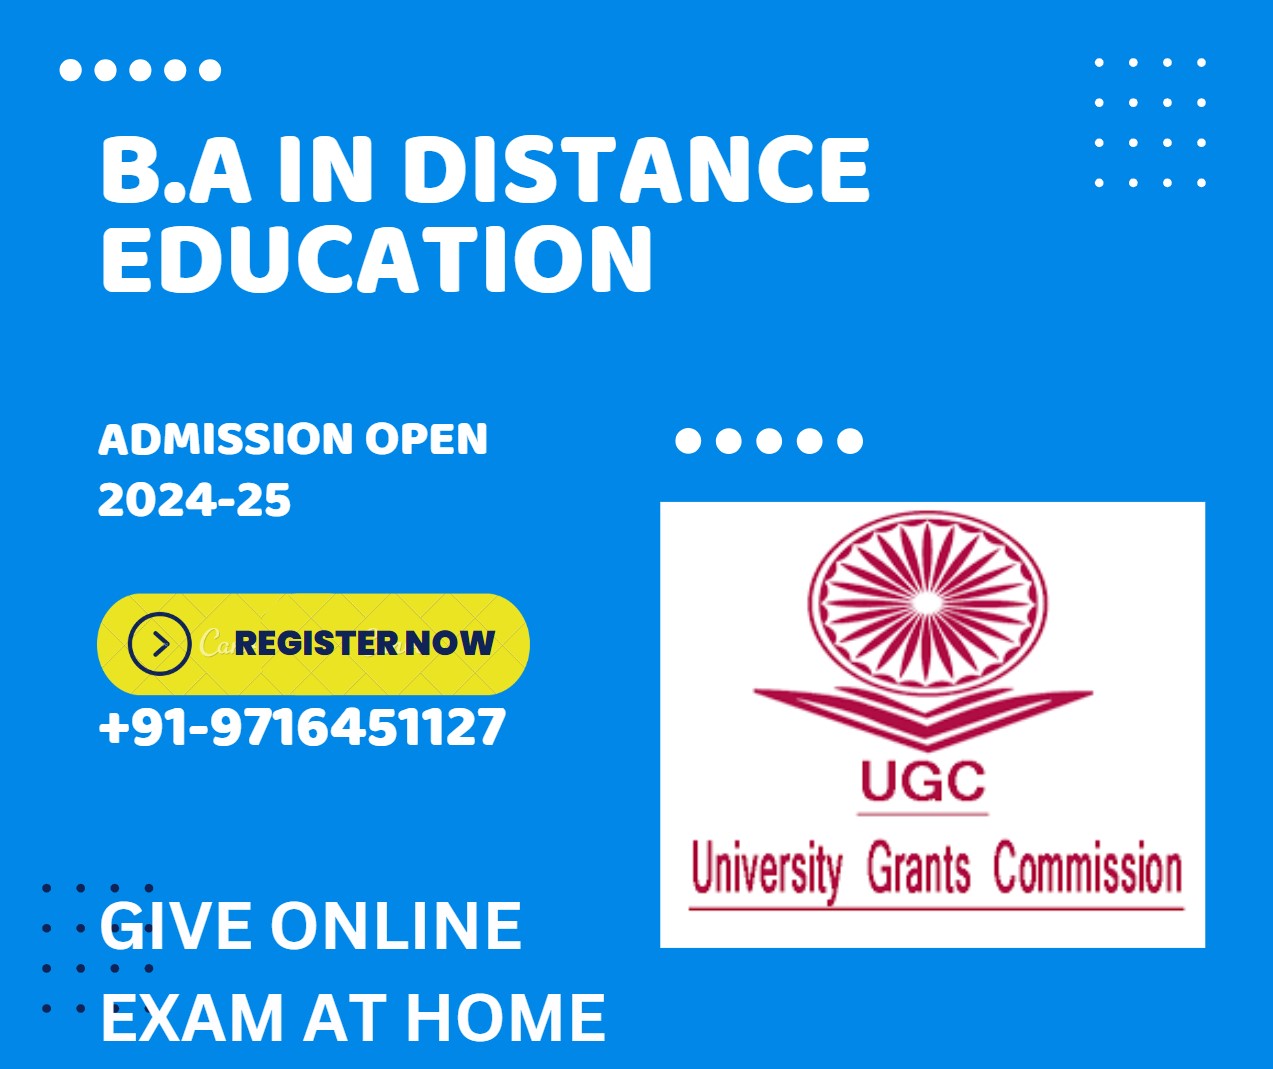 B.A IN DISTANCE EDUCATION